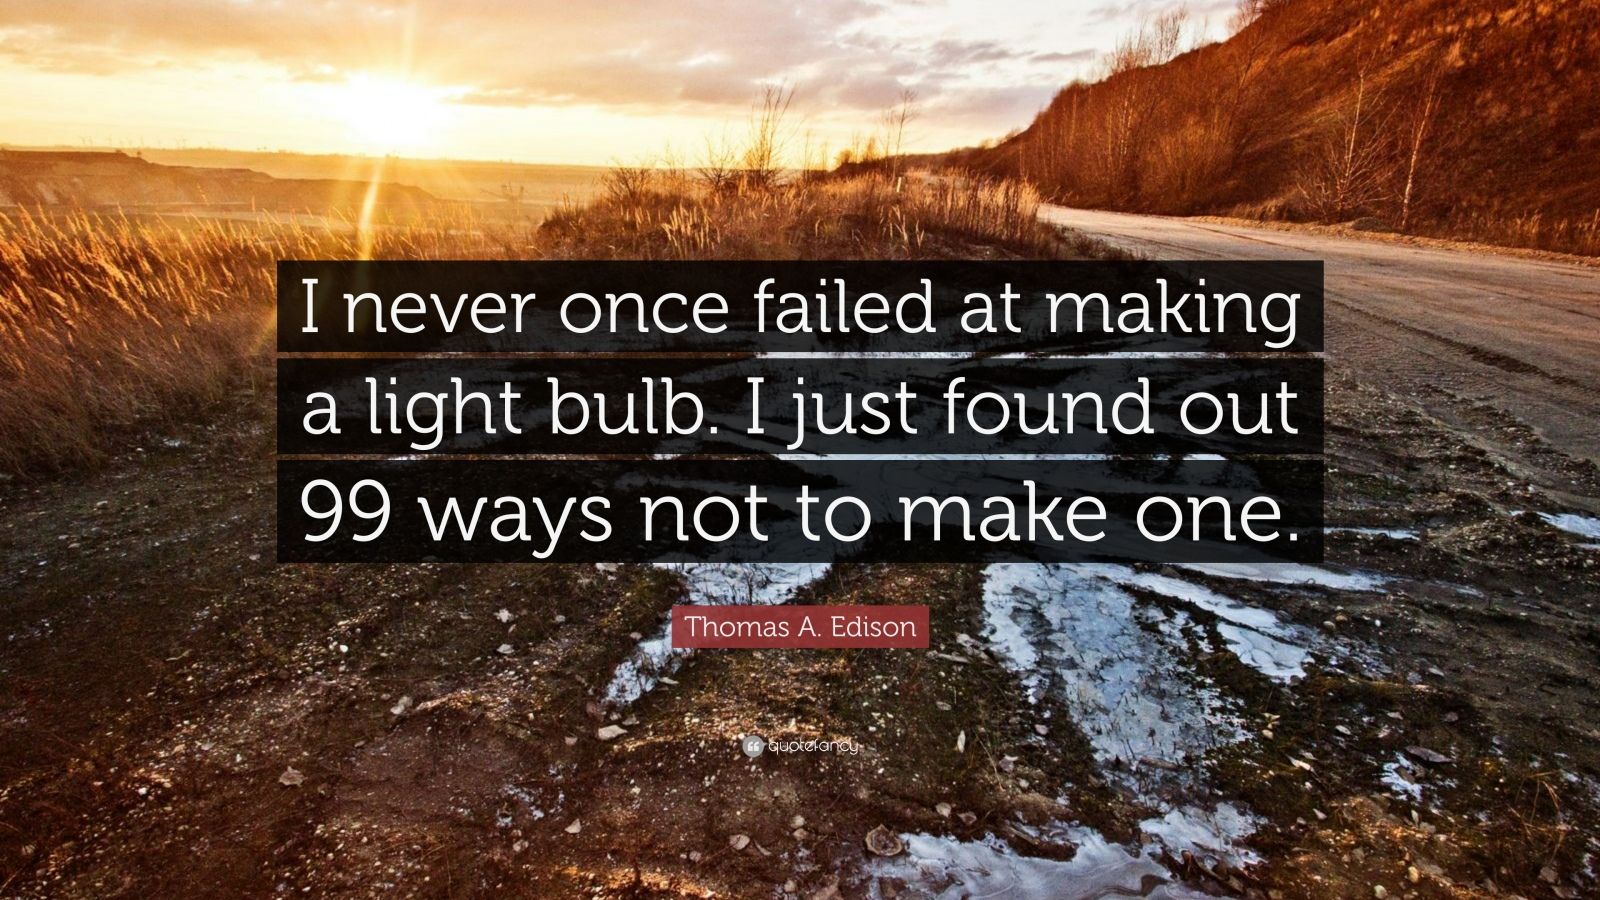 Thomas A. Edison Quote: “I never once failed at making a light bulb. I